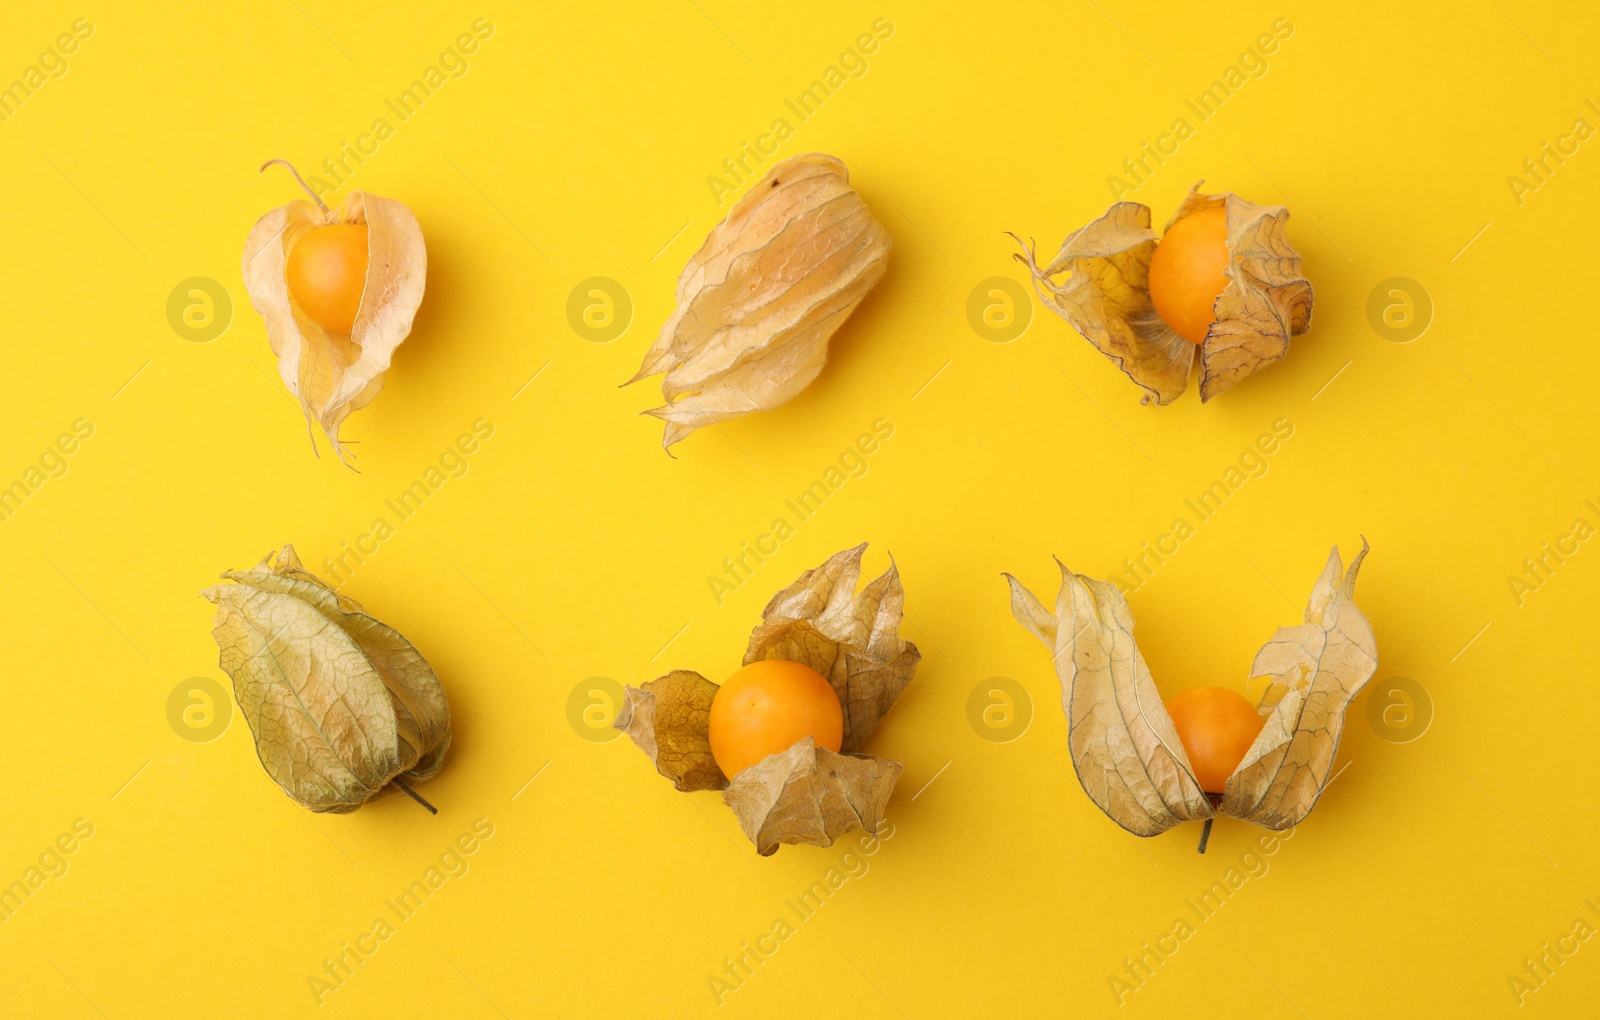 Photo of Ripe physalis fruits with calyxes on yellow background, flat lay